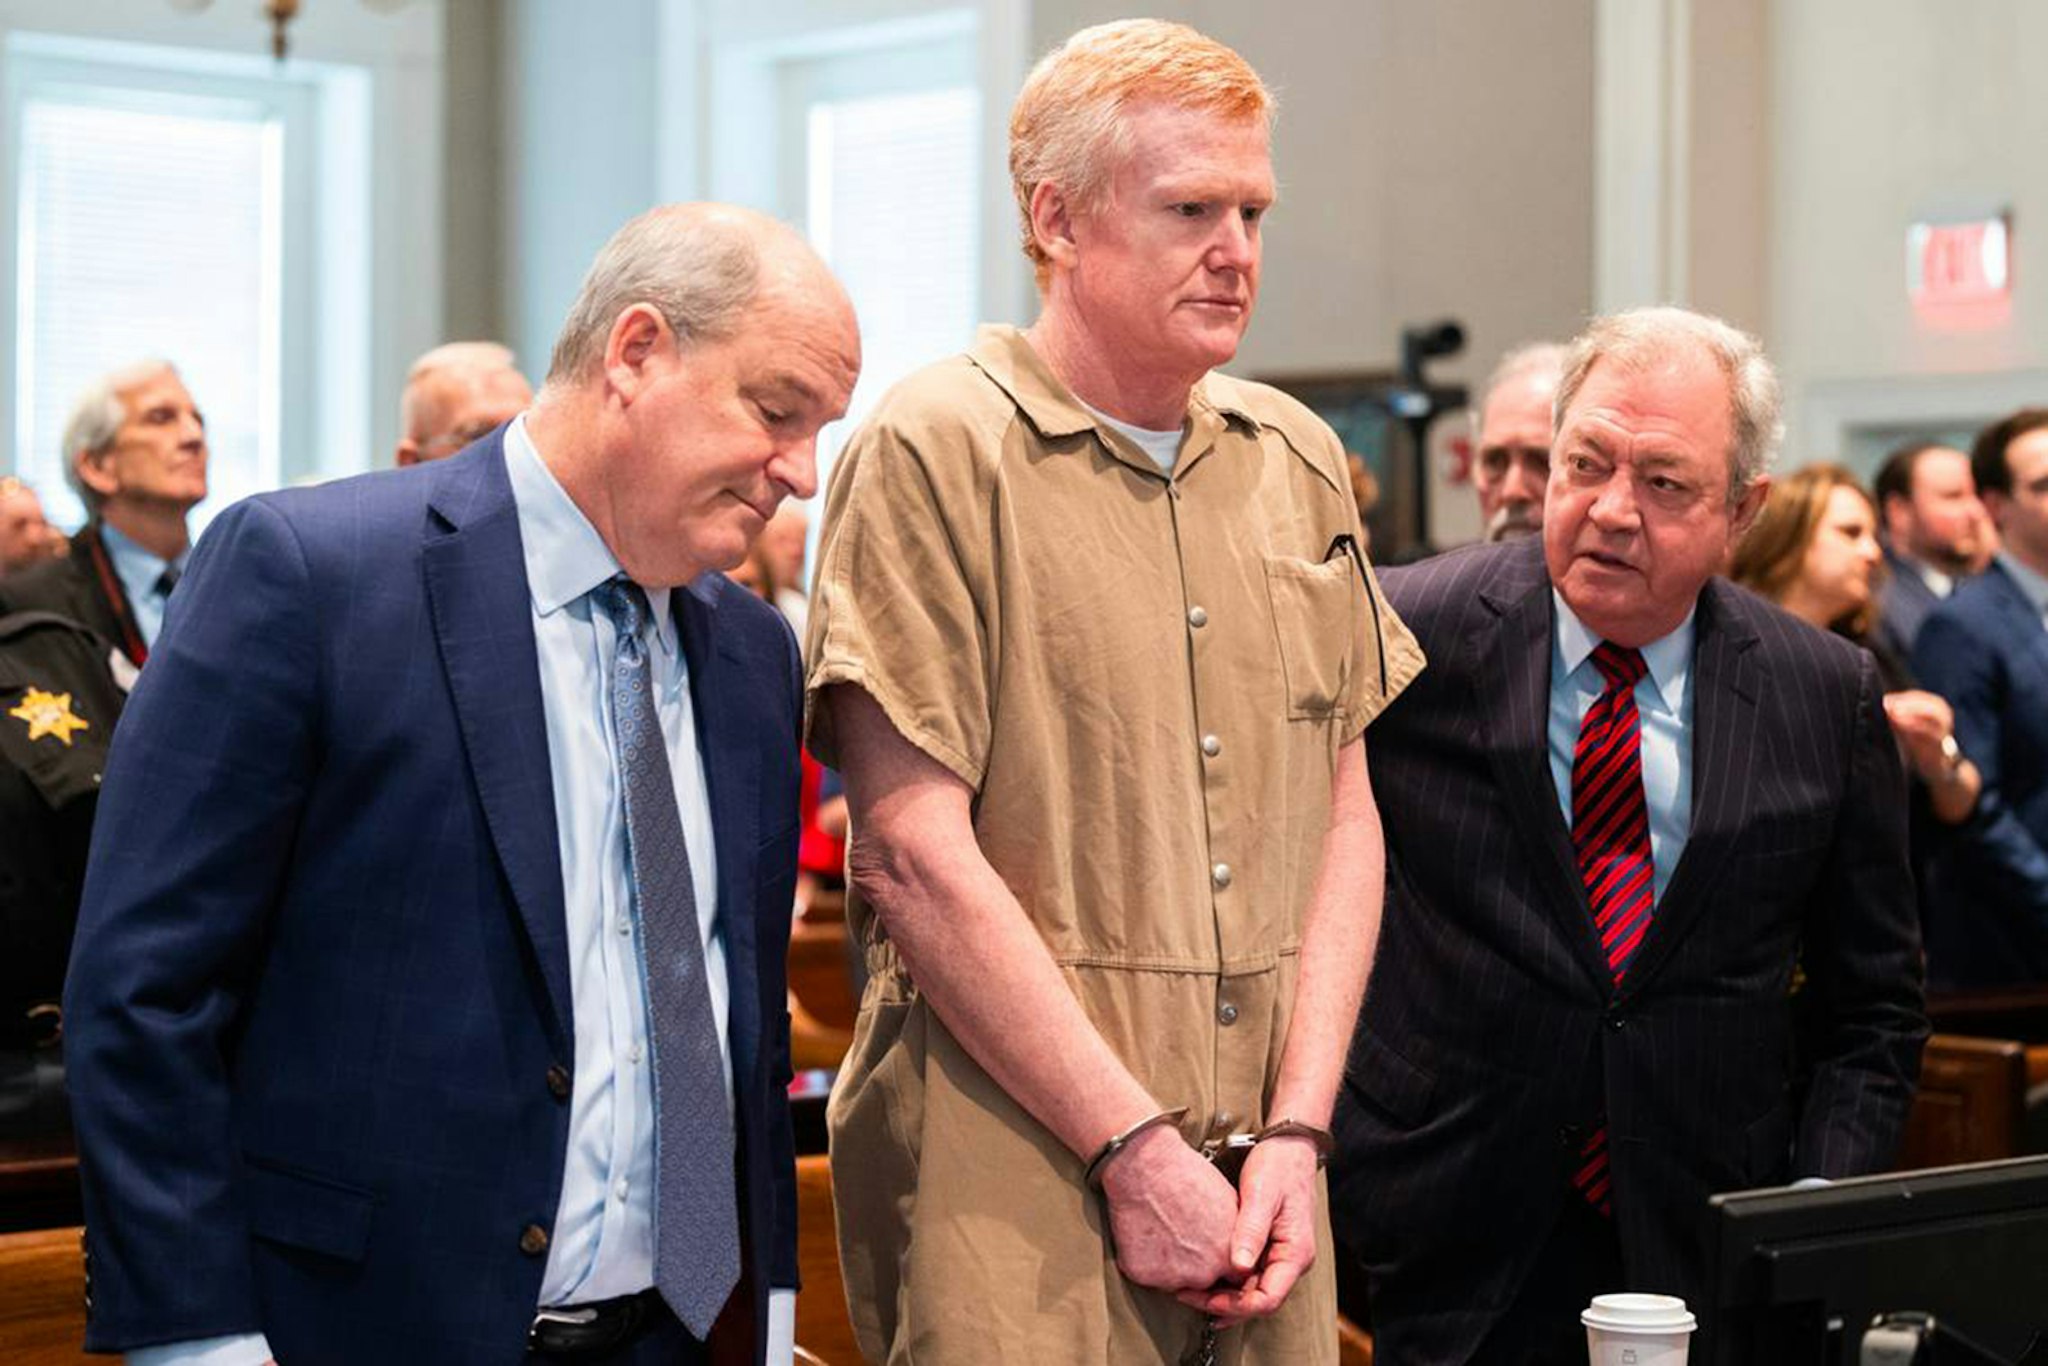 Alex Murdaugh speaks with his legal team before he is sentenced to two consecutive life sentences for the murder of his wife and son by Judge Clifton Newman at the Colleton County Courthouse on Friday, March 3, 2023.